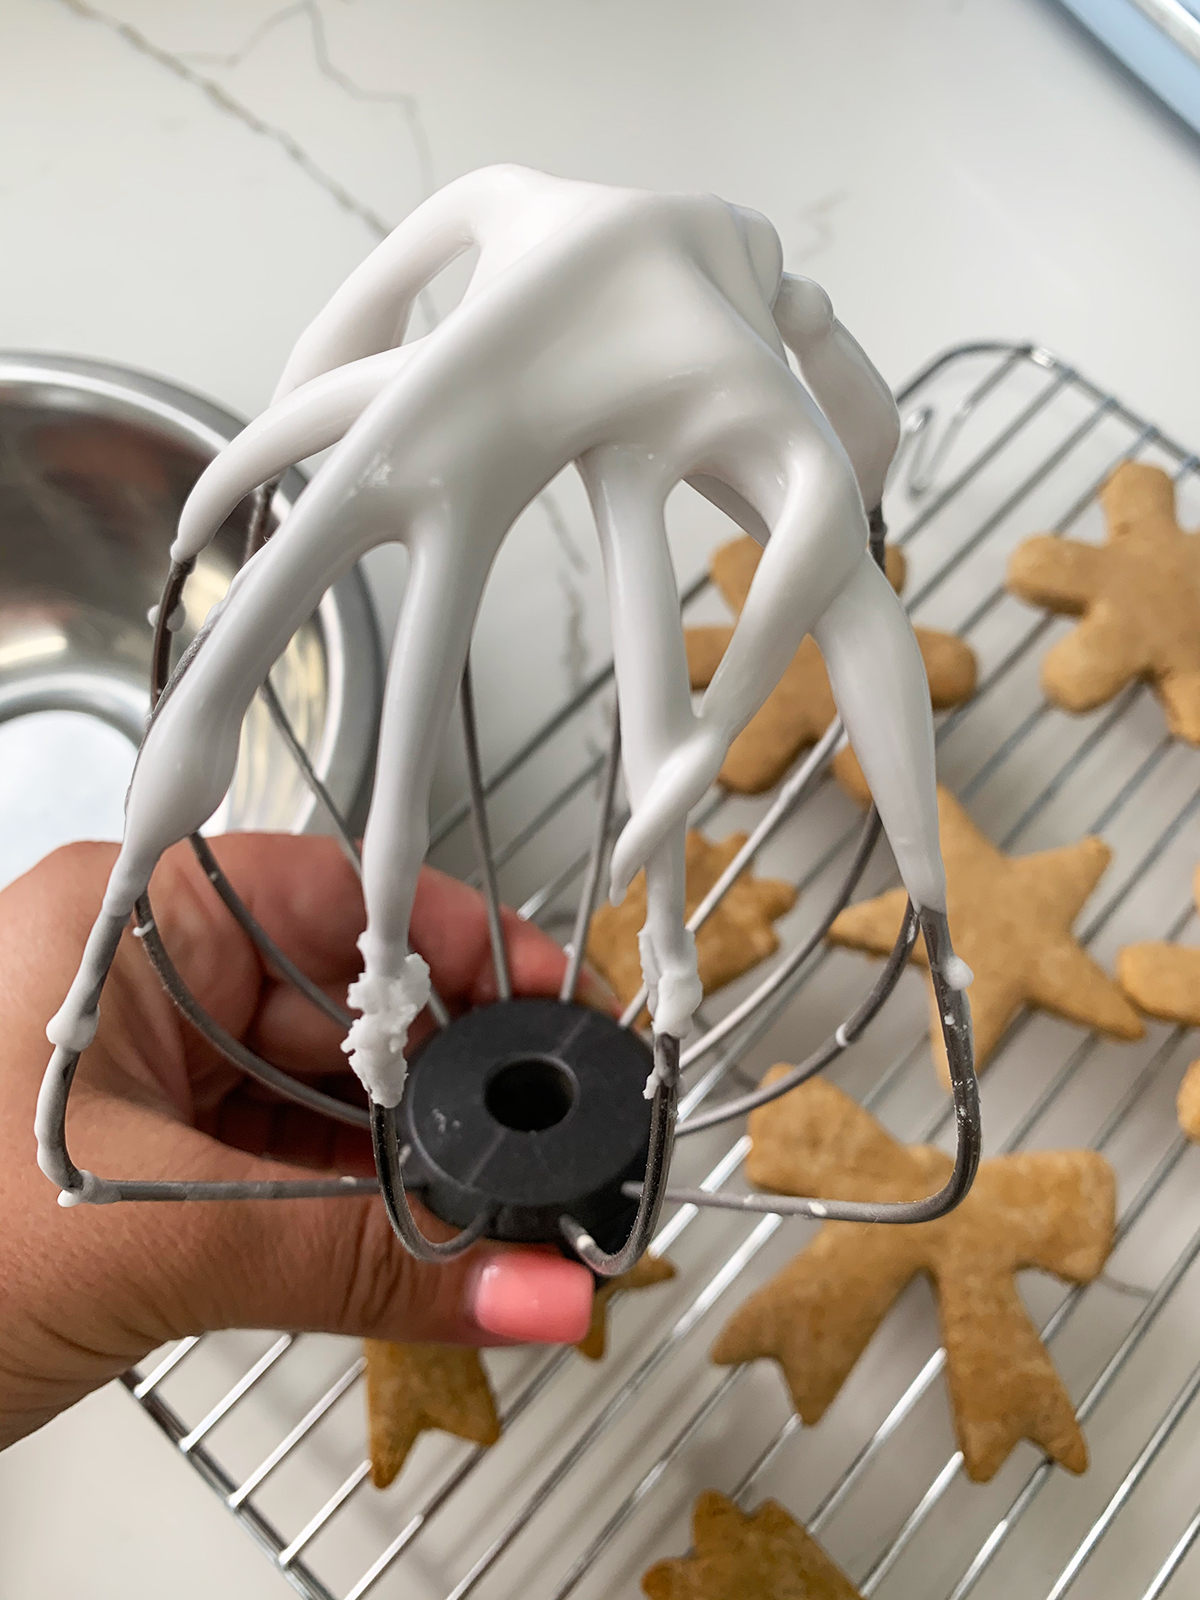 Vegan royal icing held on a whisk with gluten free gingerbread cookies in the background